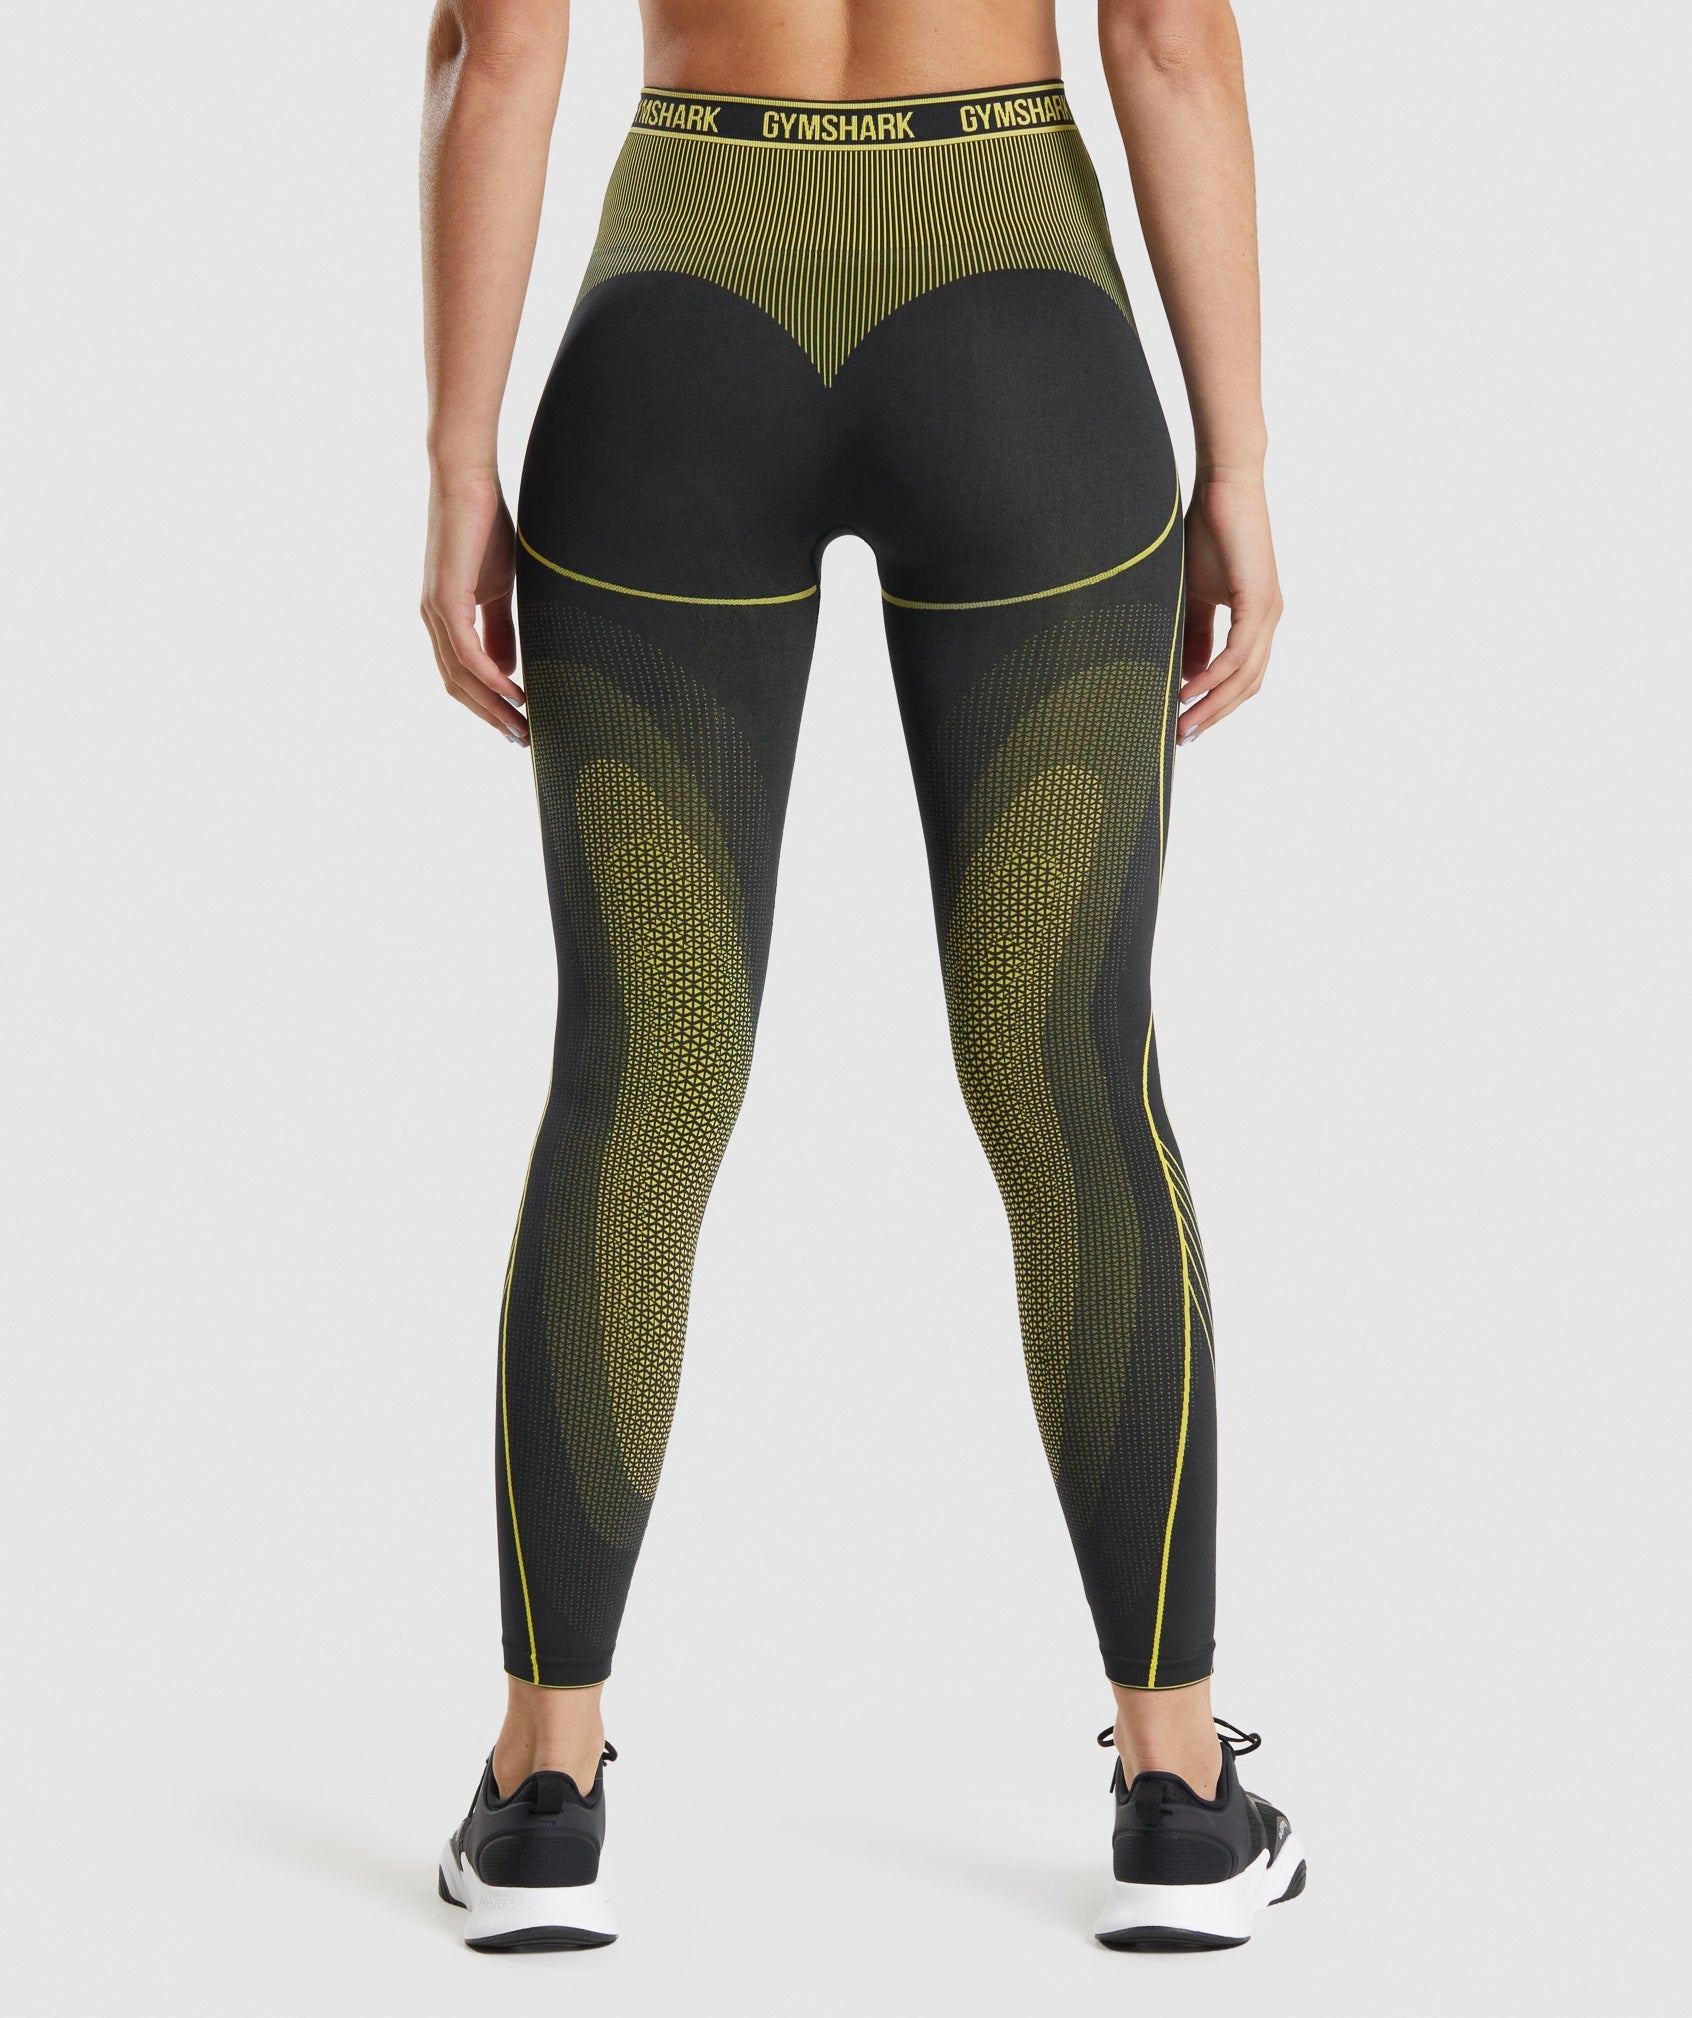 Gymshark Apex Seamless High Leggings - – Client 446 100K products